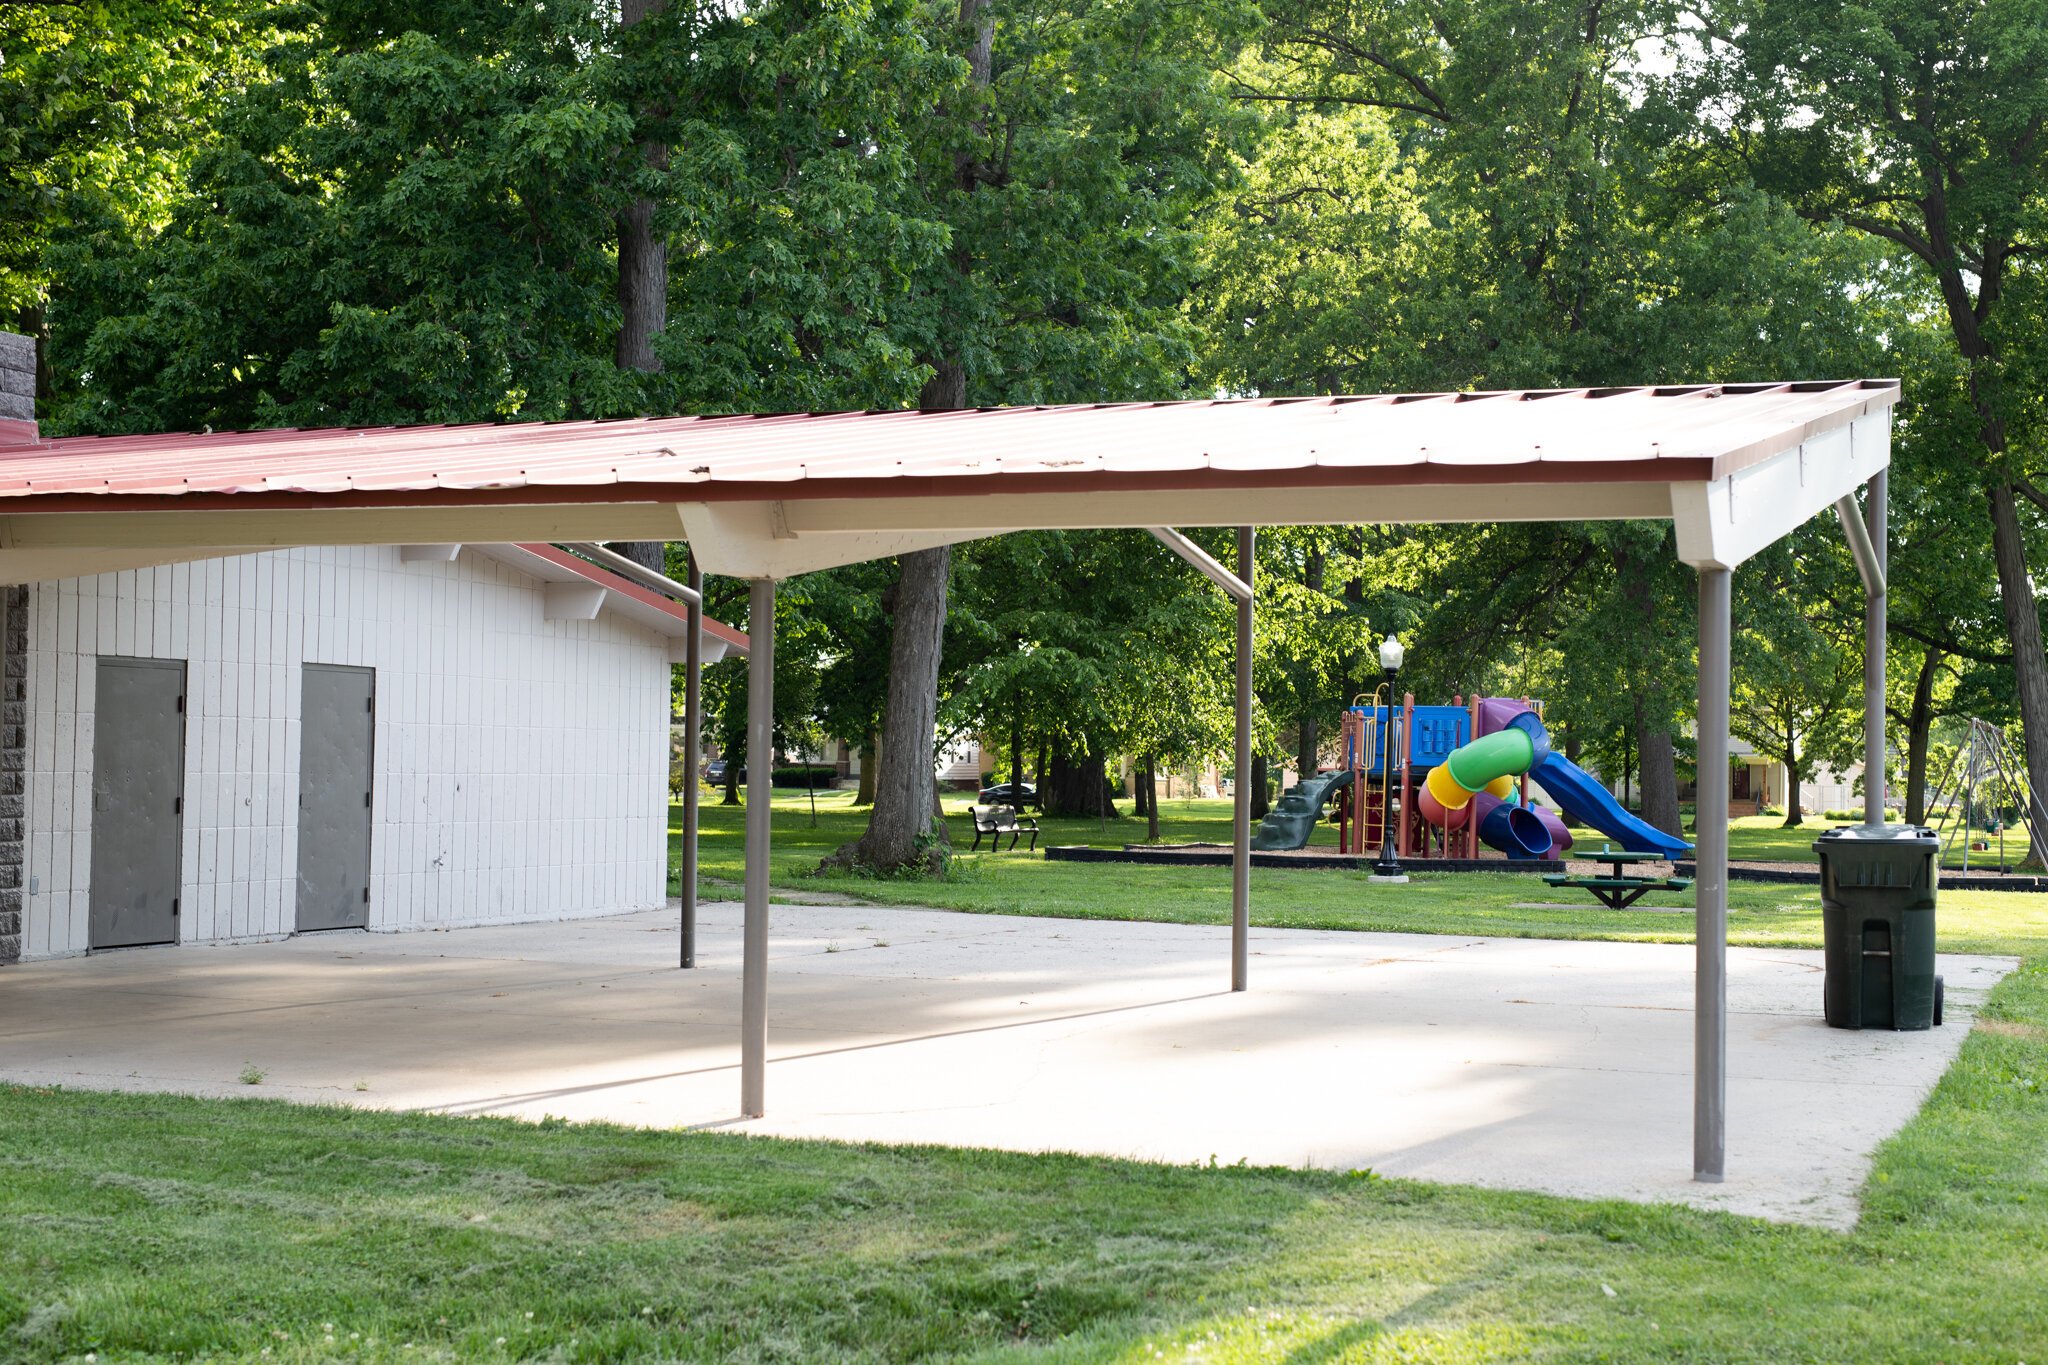 Weisser Park will host some Juneteenth events in 2021.